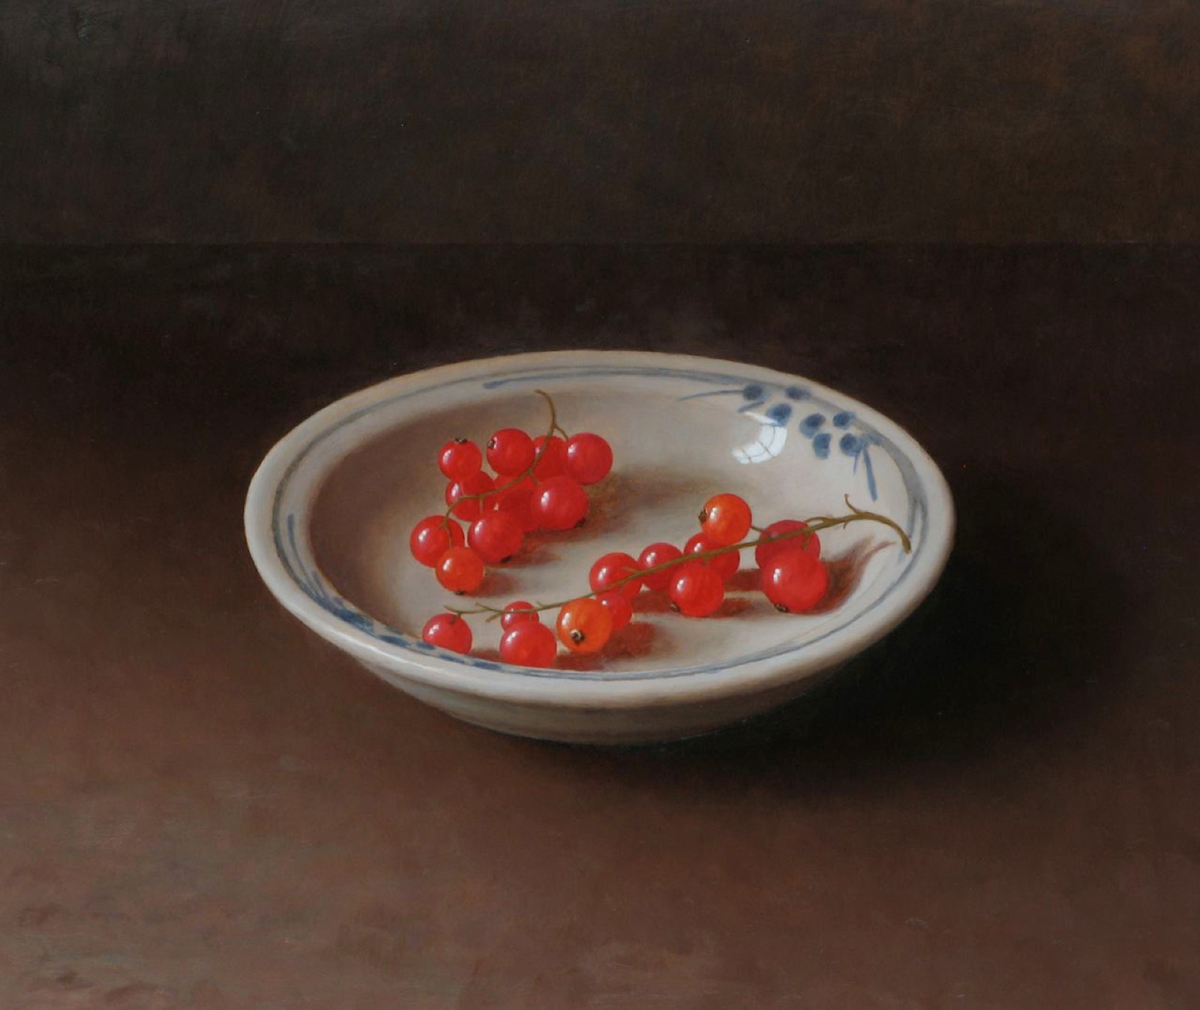 a dish with redcurrants in it on a shelf